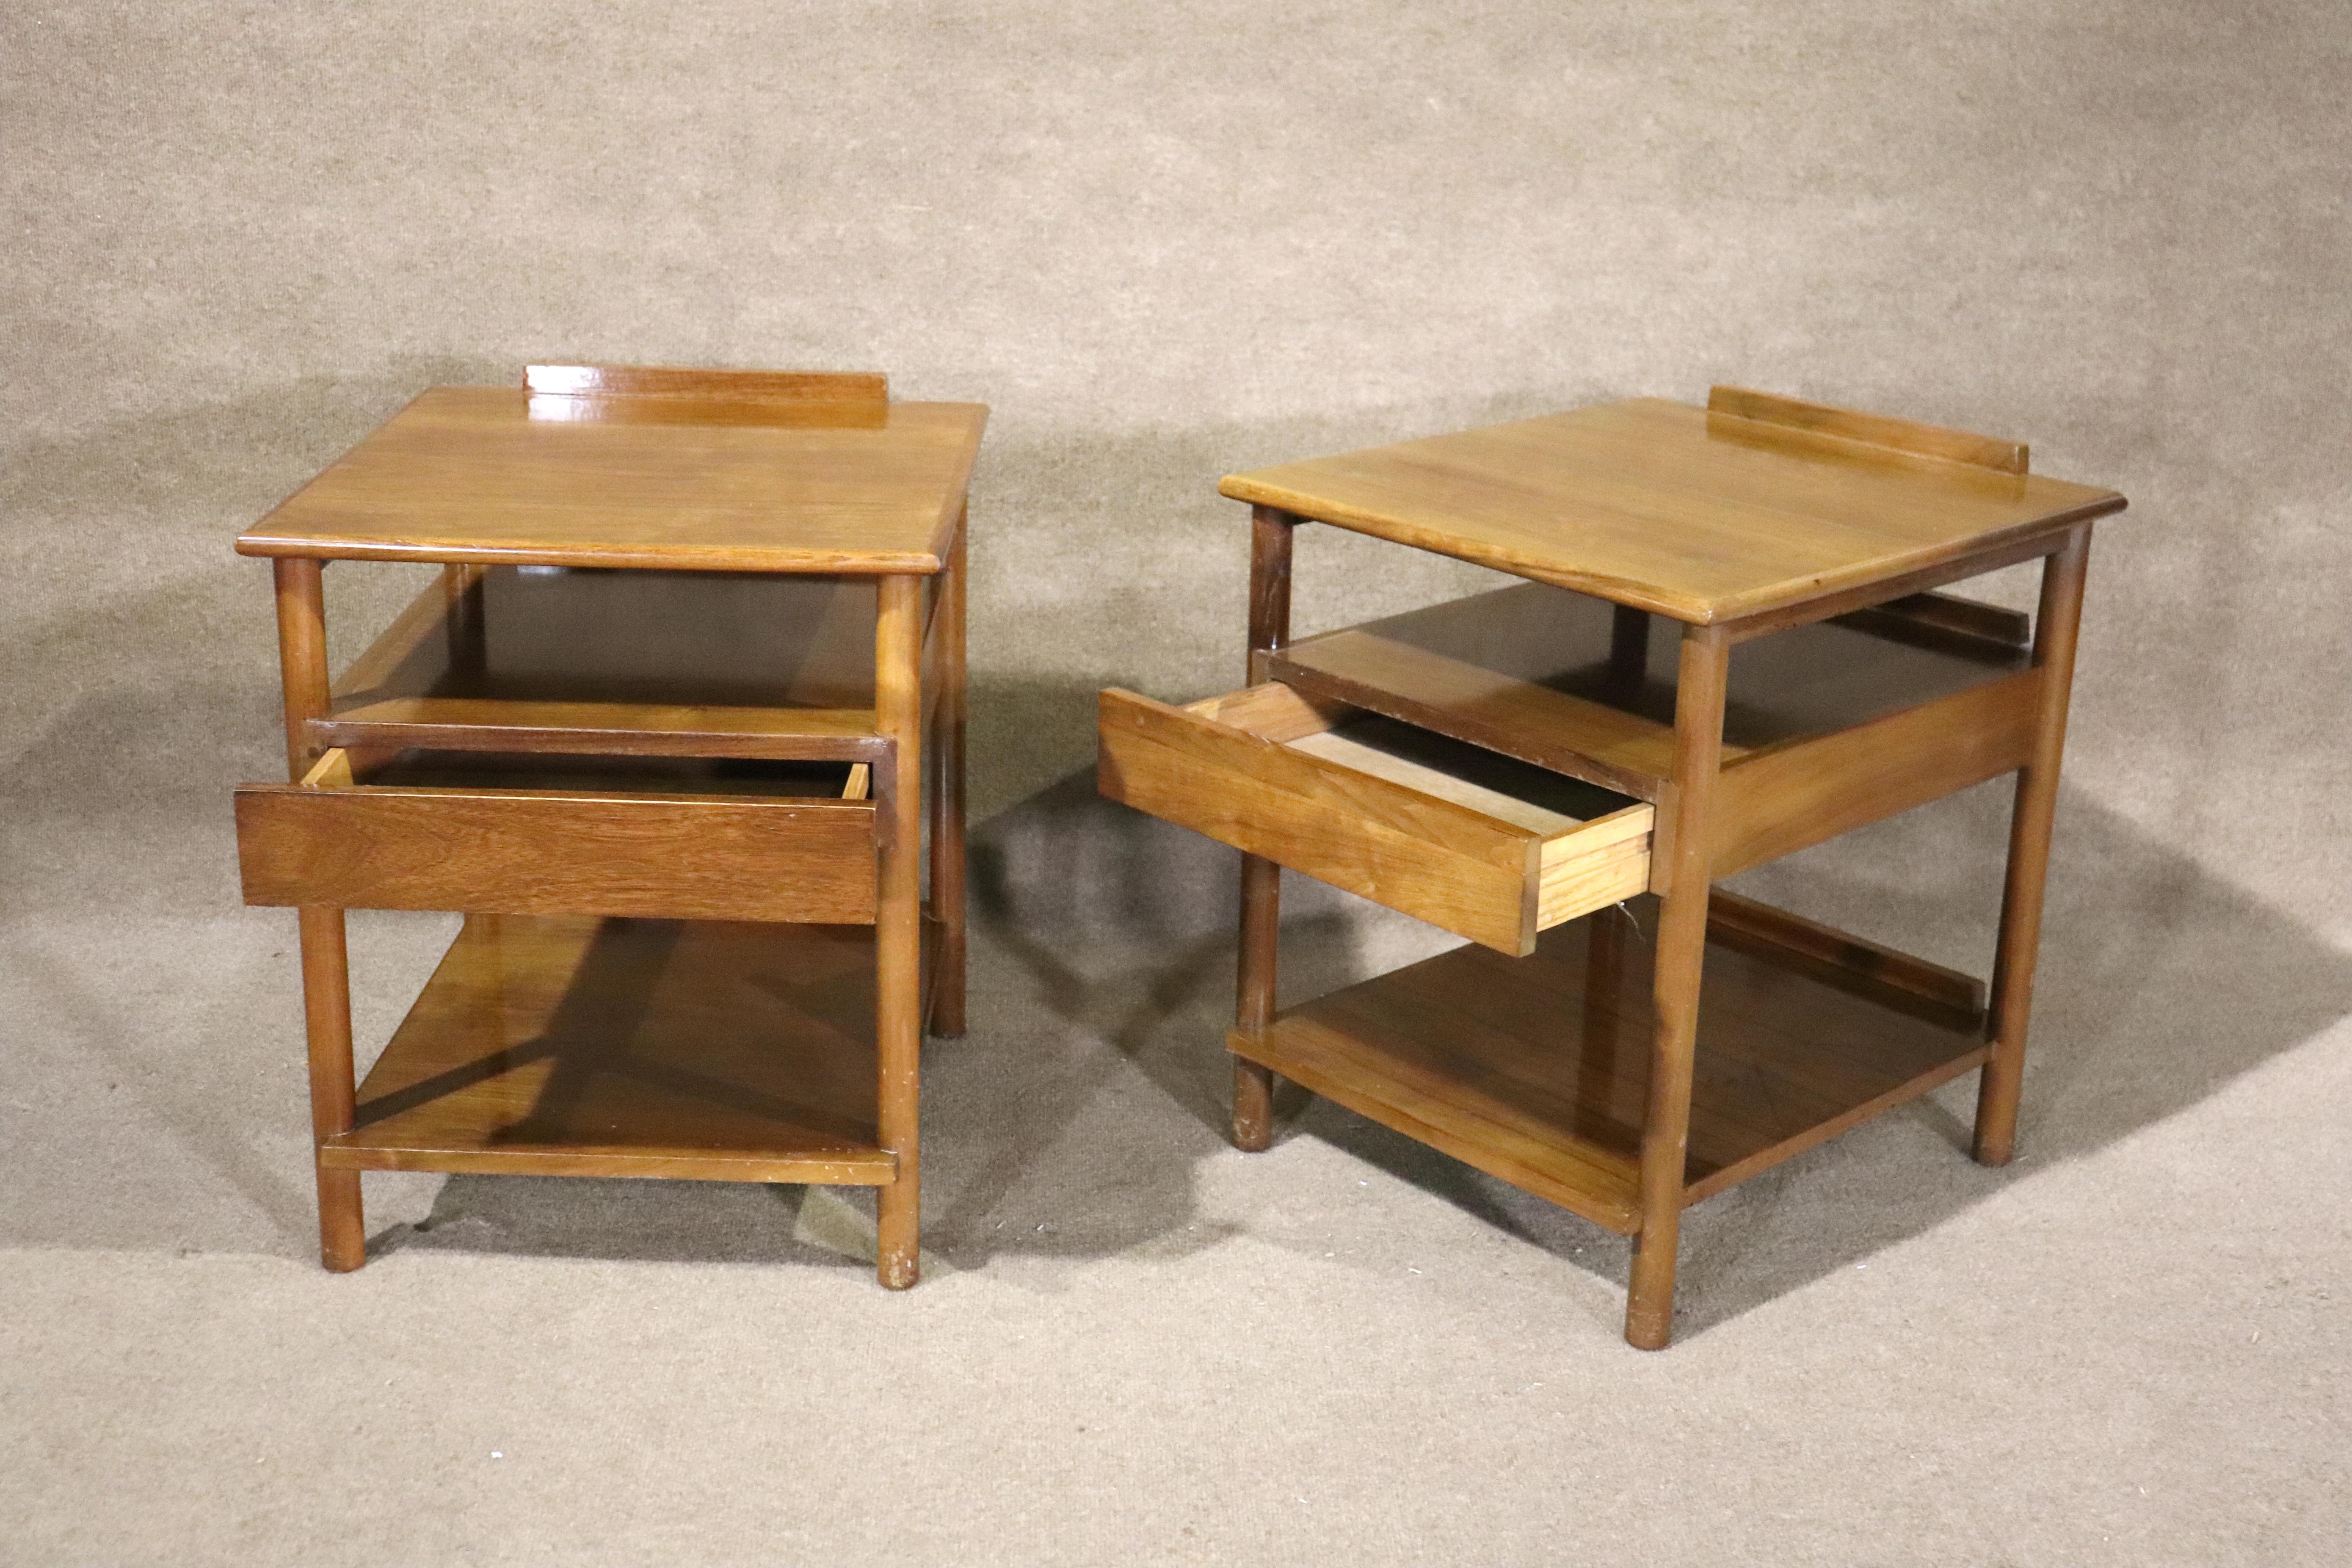 William Pahlmann designed tables with open storage and drawer. Sold through John Stuart Inc. These tables are great for bedroom or sofa use.
Please confirm location NY or NJ